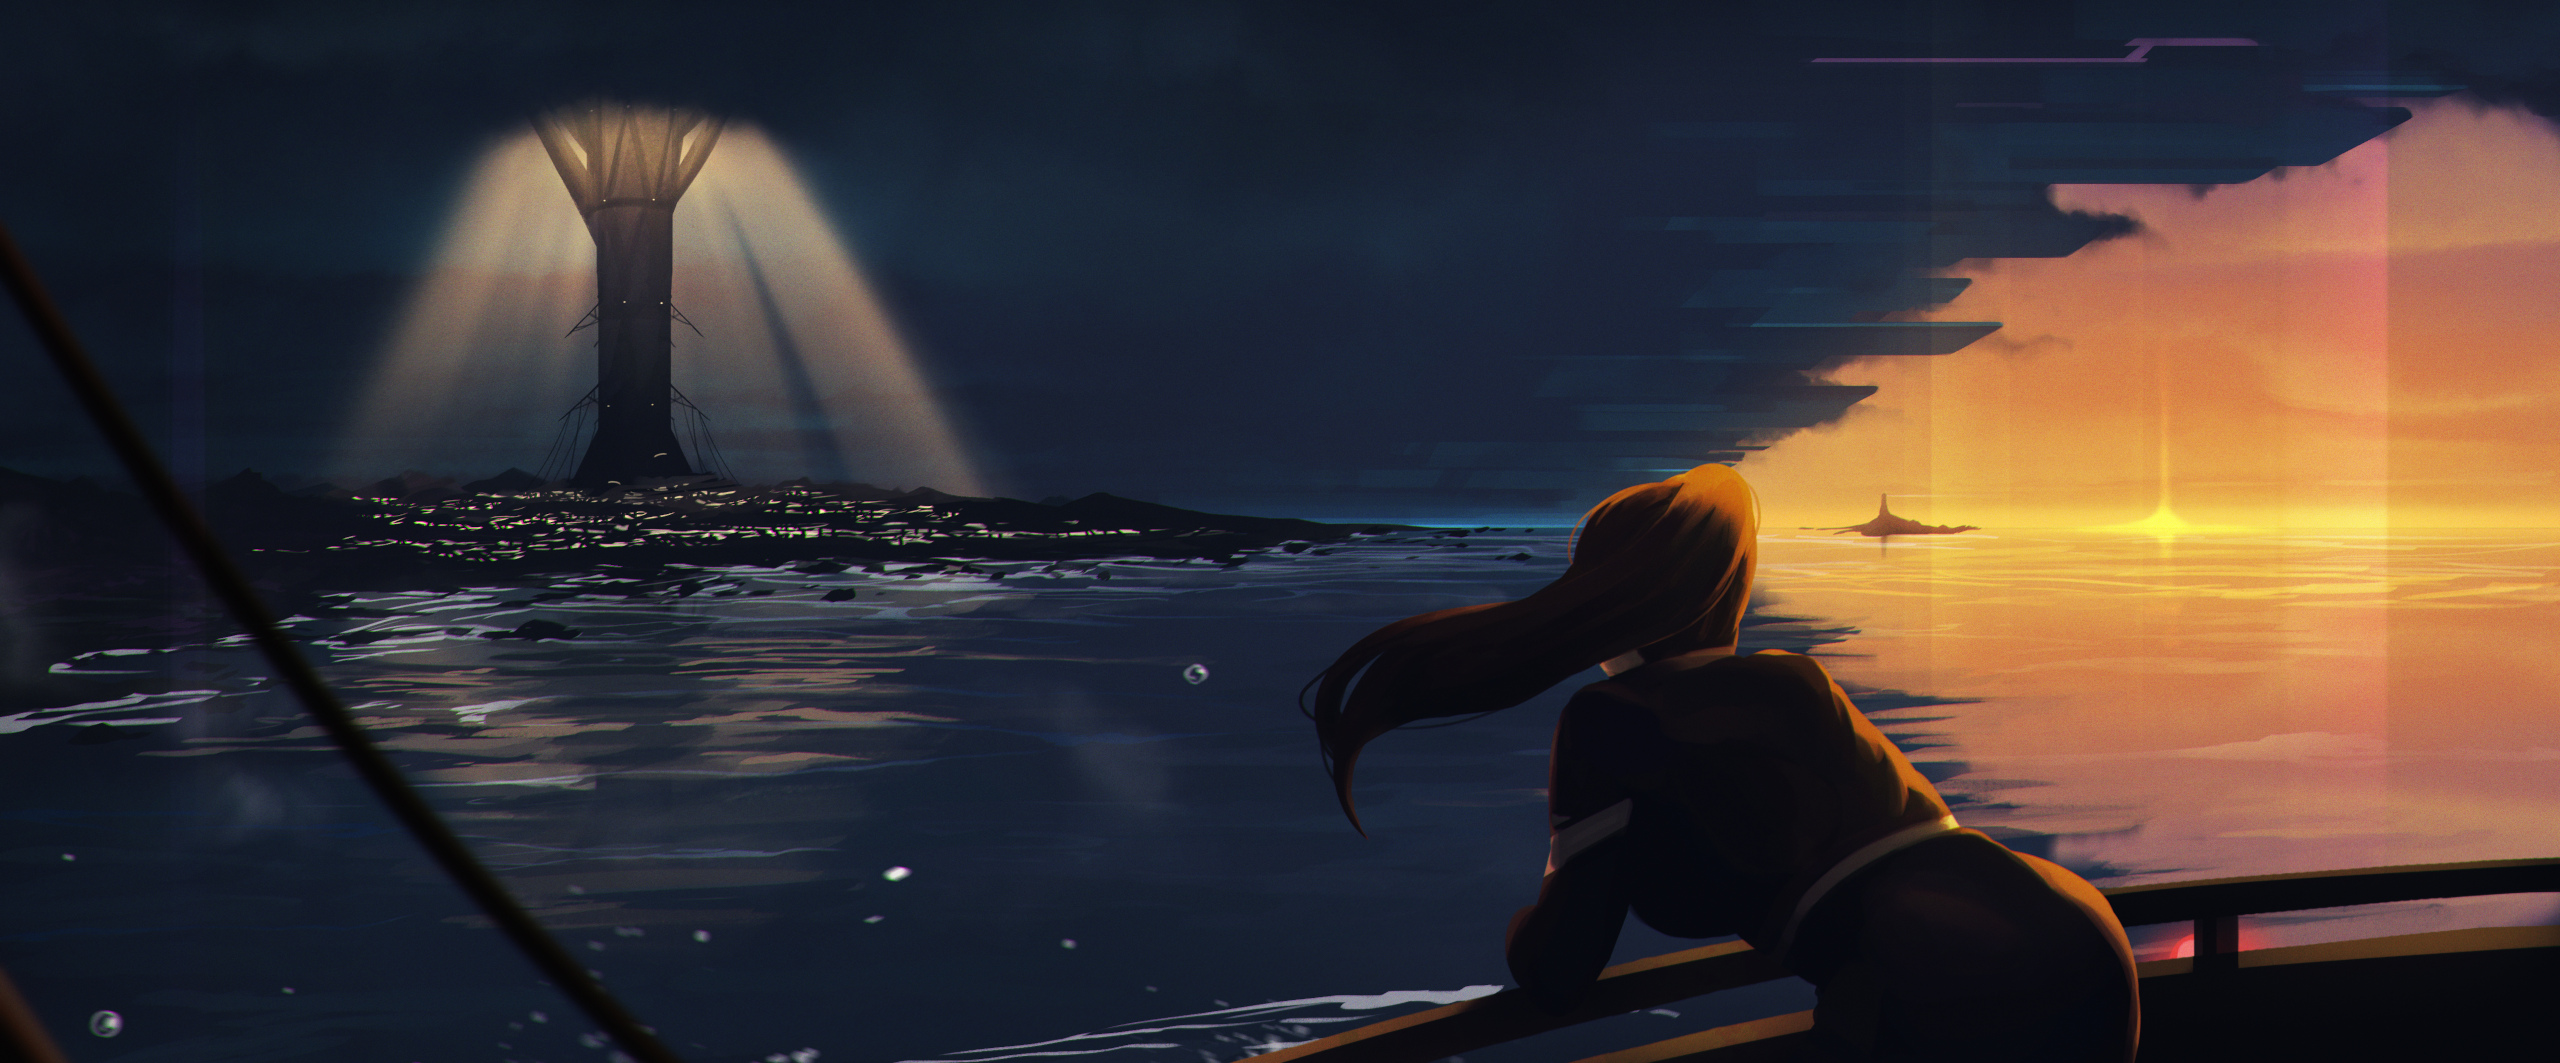 Concept art depicting a woman on the deck of a ship, gazing over the railing. In the distance she can see the shore with buildings lining the coastline. The view is dominated by a towering tree-like structure and the sky is blocked out by an oily black cloud.